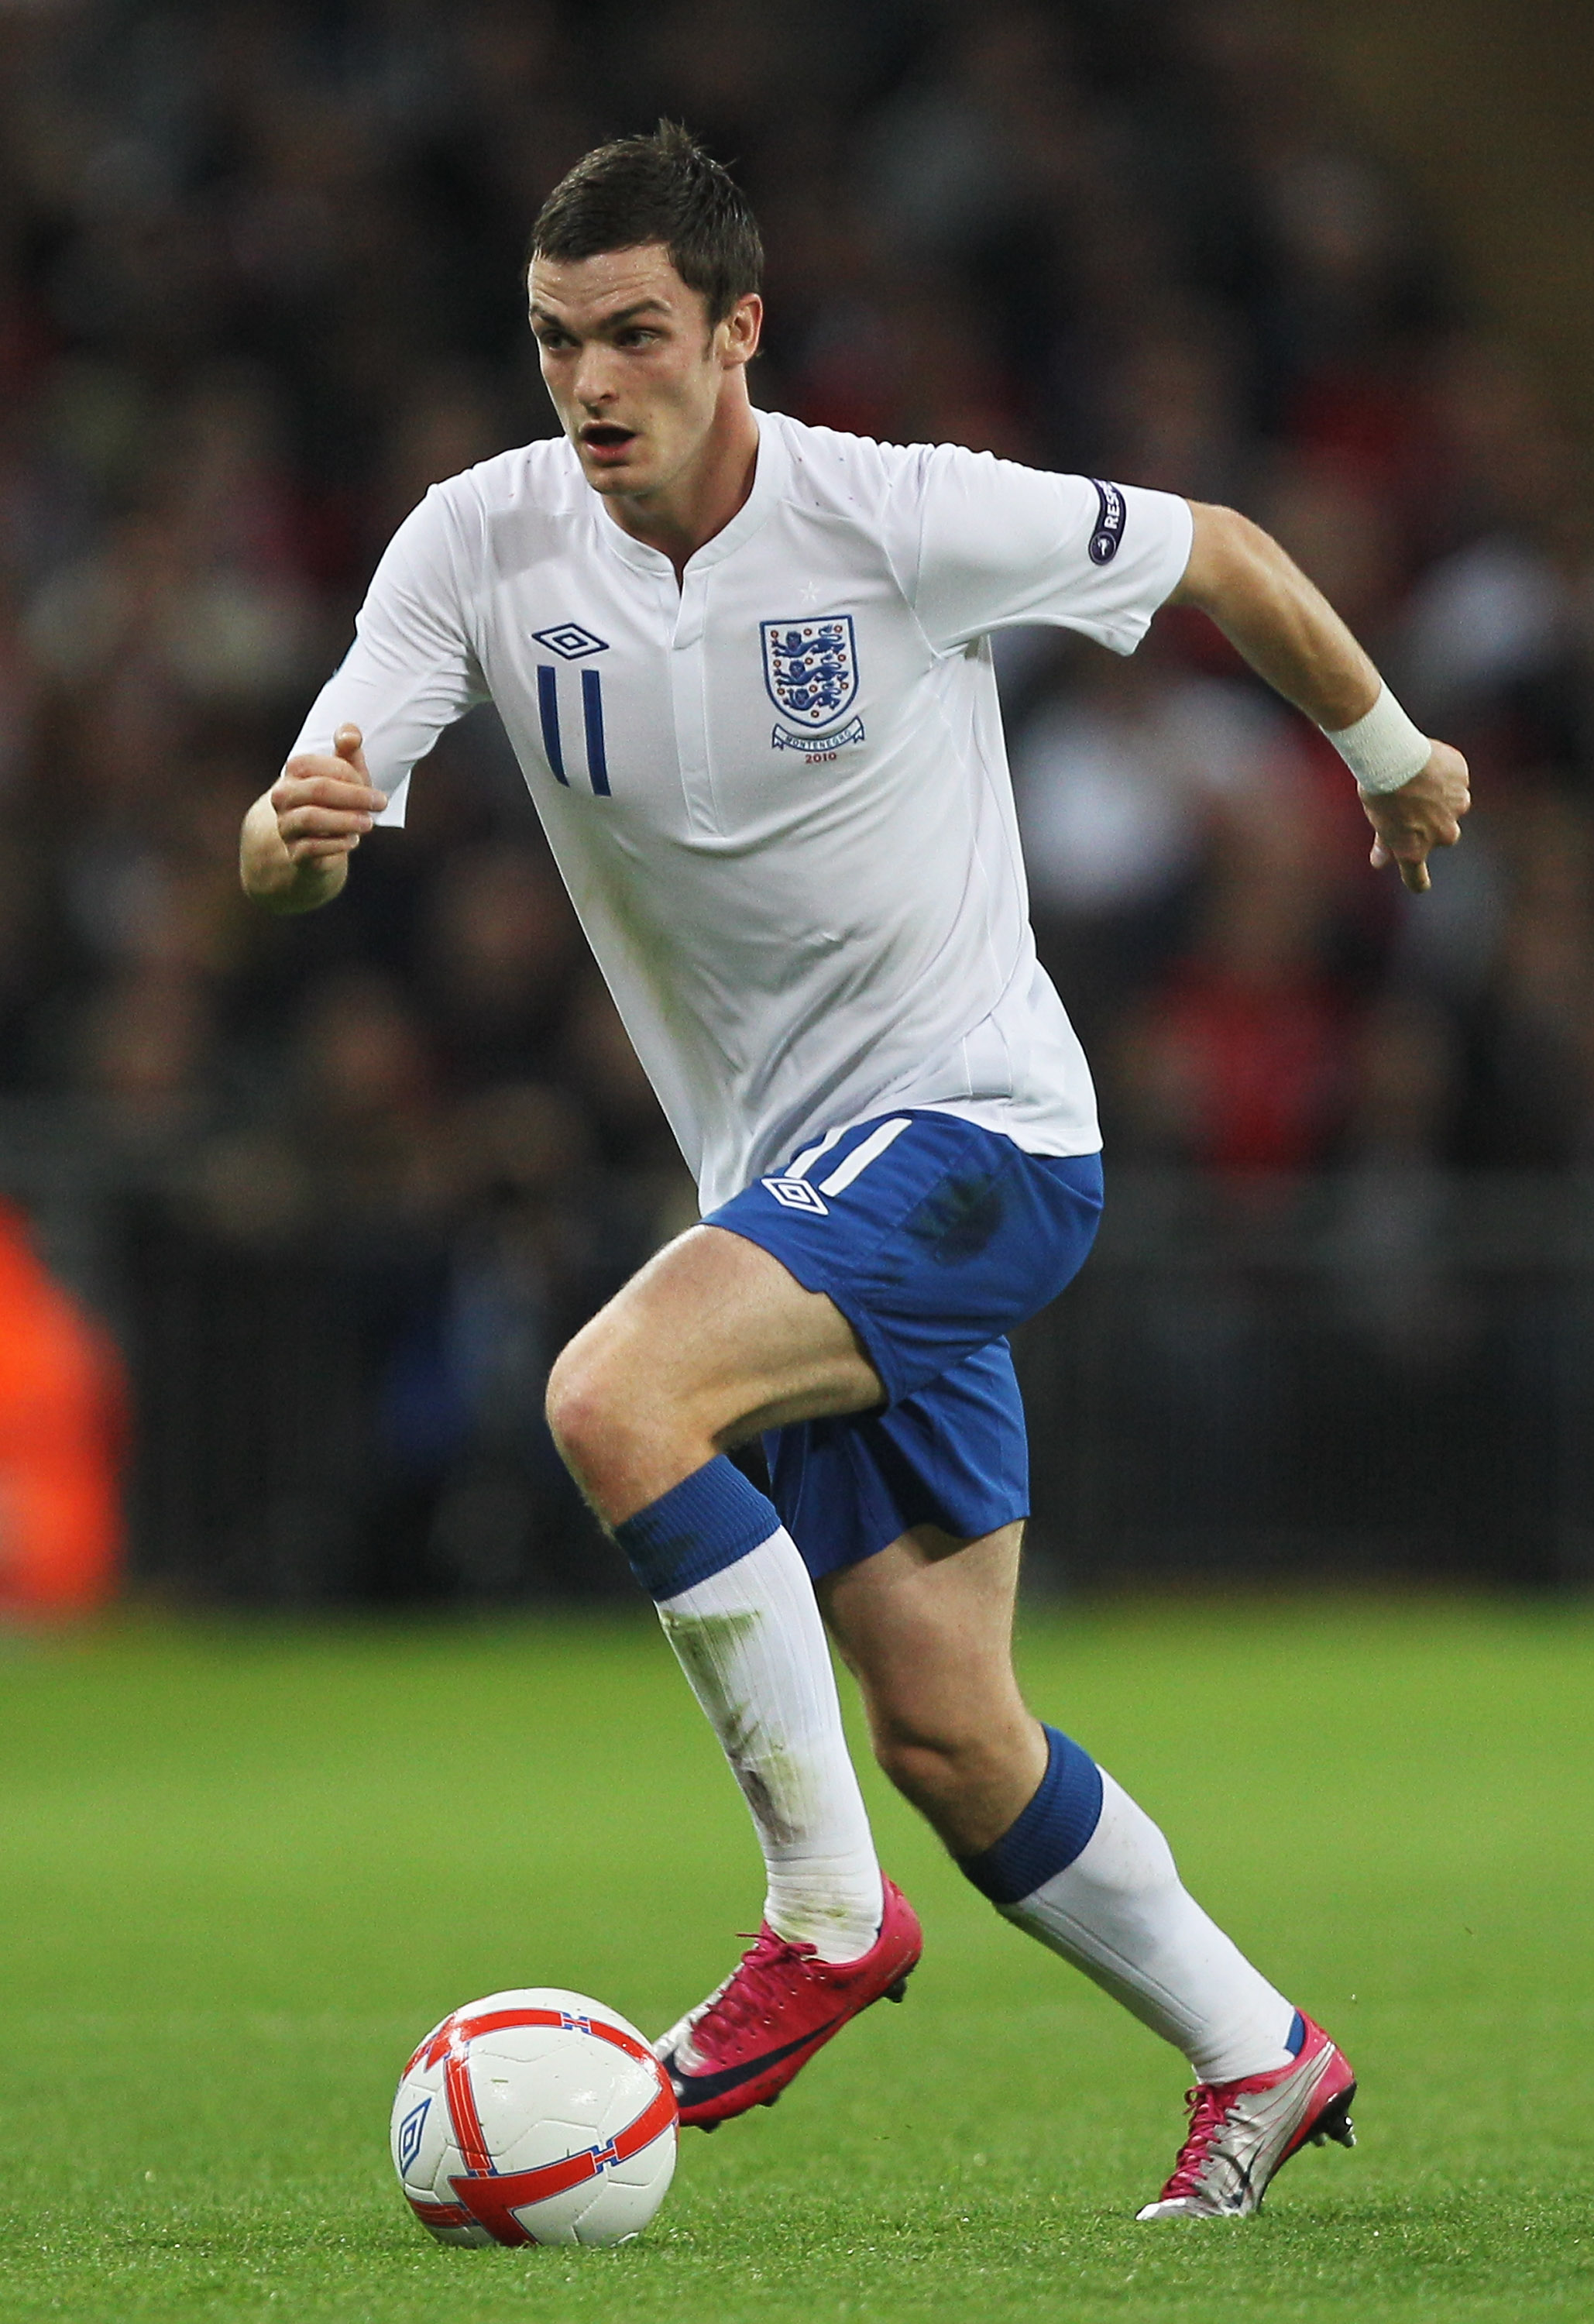 LONDON, ENGLAND - OCTOBER 12:  Adam Johnson of England in action during the UEFA EURO 2012 Group G Qualifying match between England and Montenegro at Wembley Stadium on October 12, 2010 in London, England.  (Photo by Hamish Blair/Getty Images)